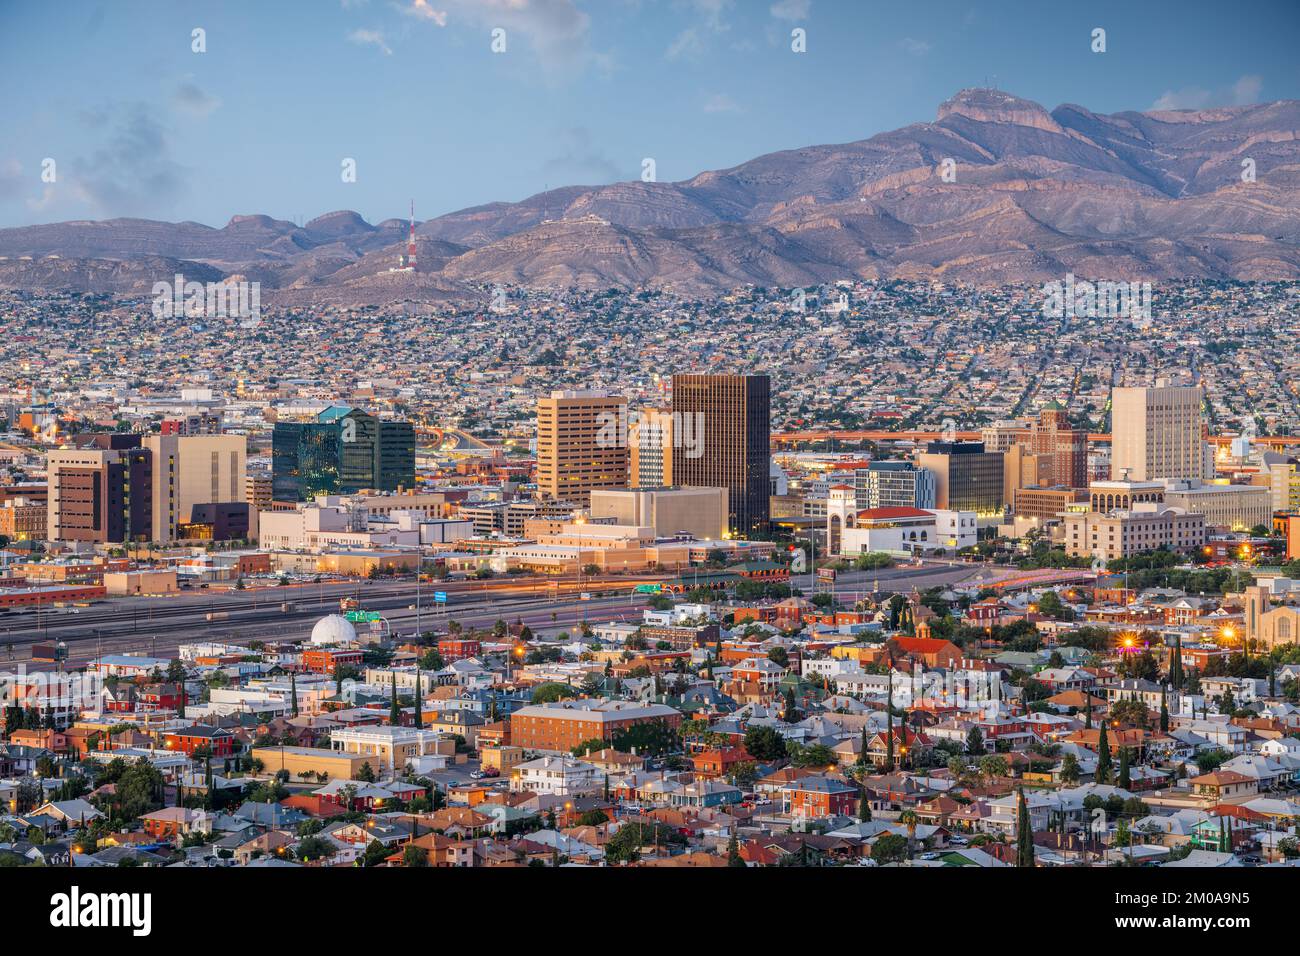 El Paso, Texas, USA  downtown city skyline at dusk with Juarez, Mexico in the distance. Stock Photo